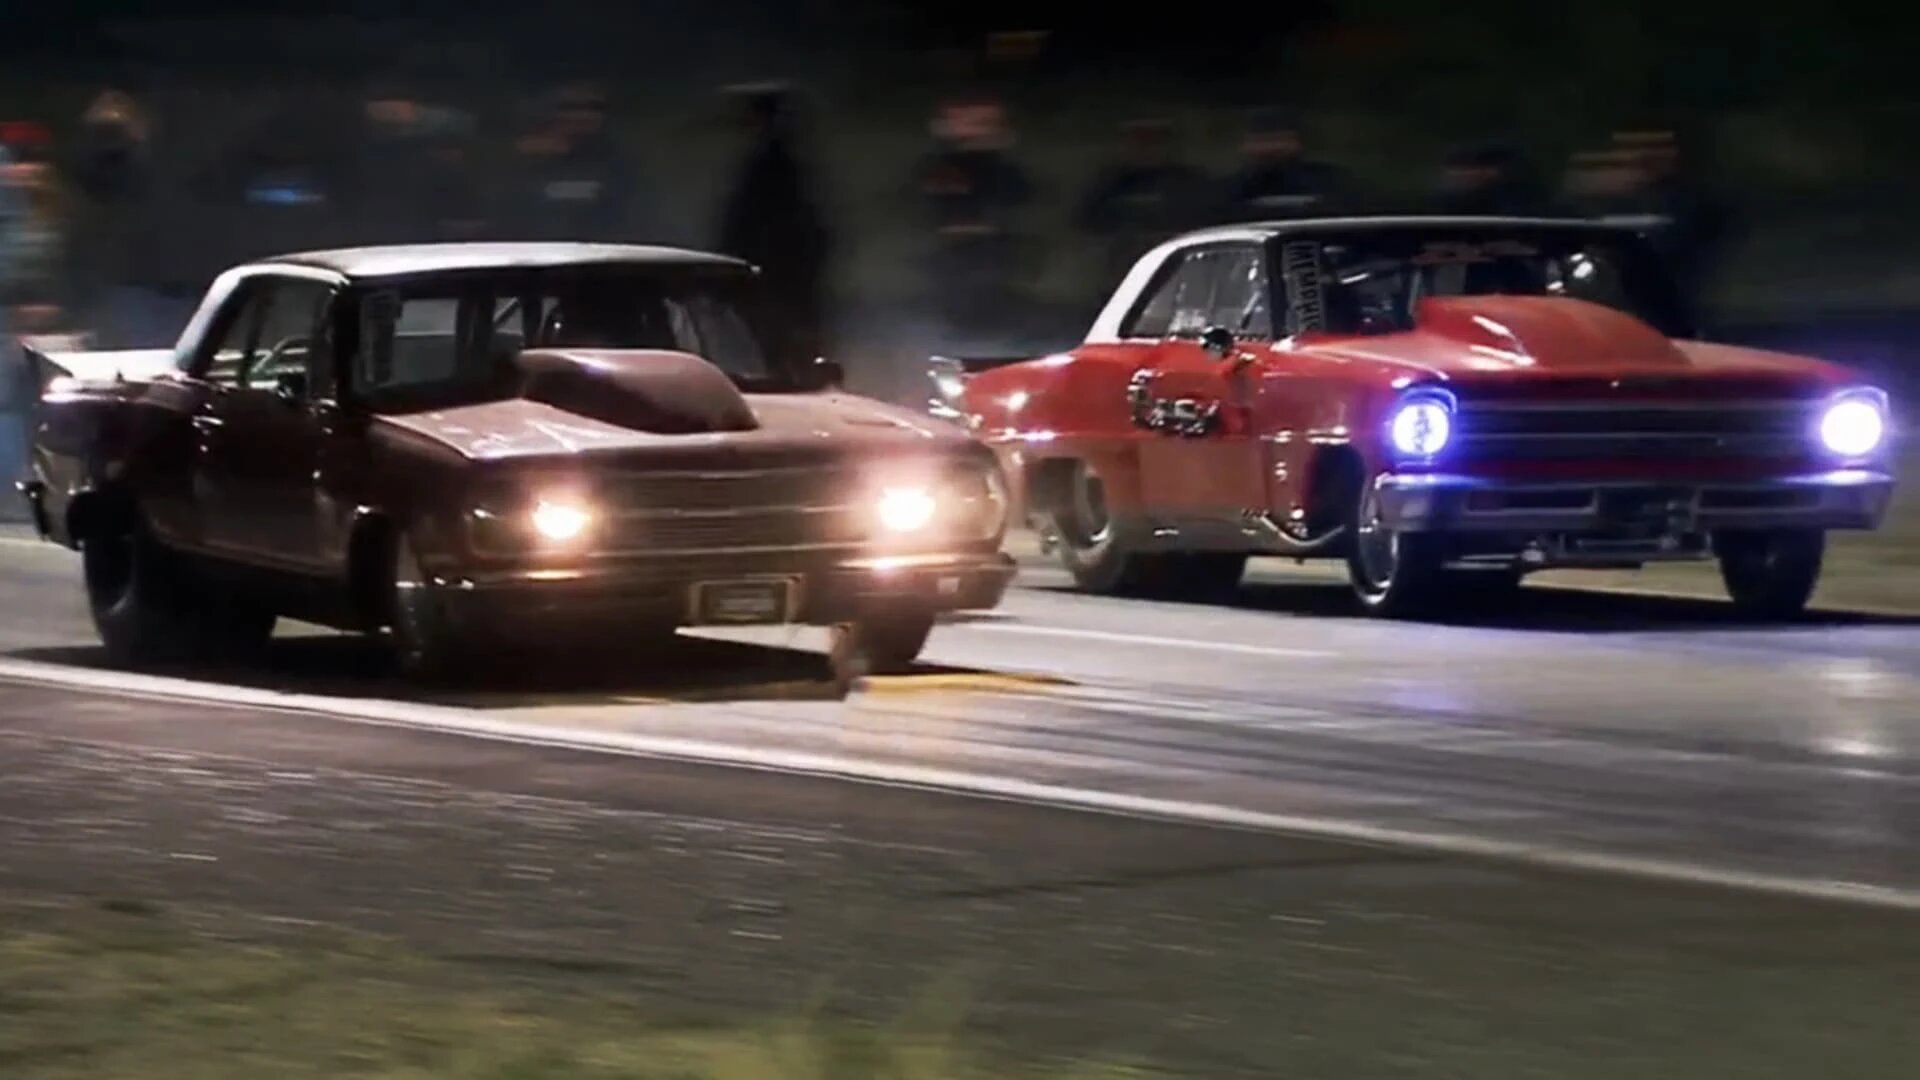 Street Outlaws Show Summary, Episodes and TV Guide from onmy